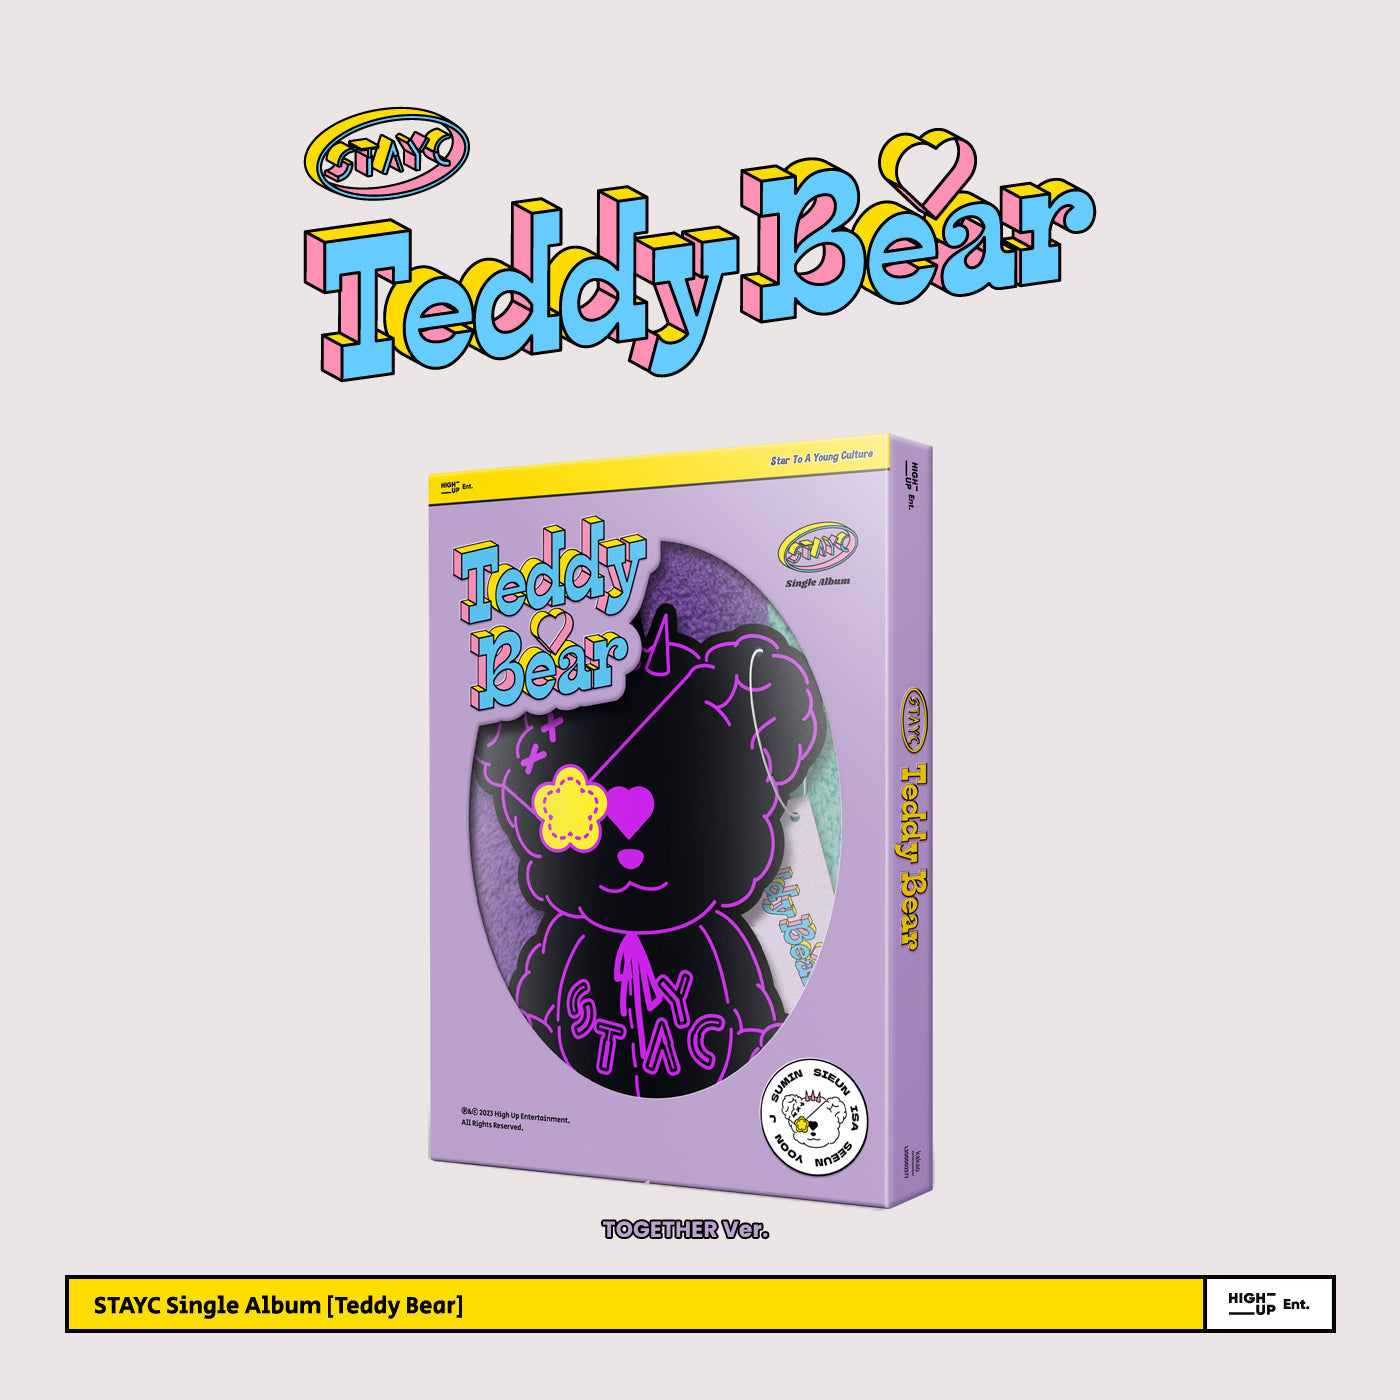 STAYC 4TH SINGLE ALBUM 'TEDDY BEAR' TOGETHER VERSION COVER